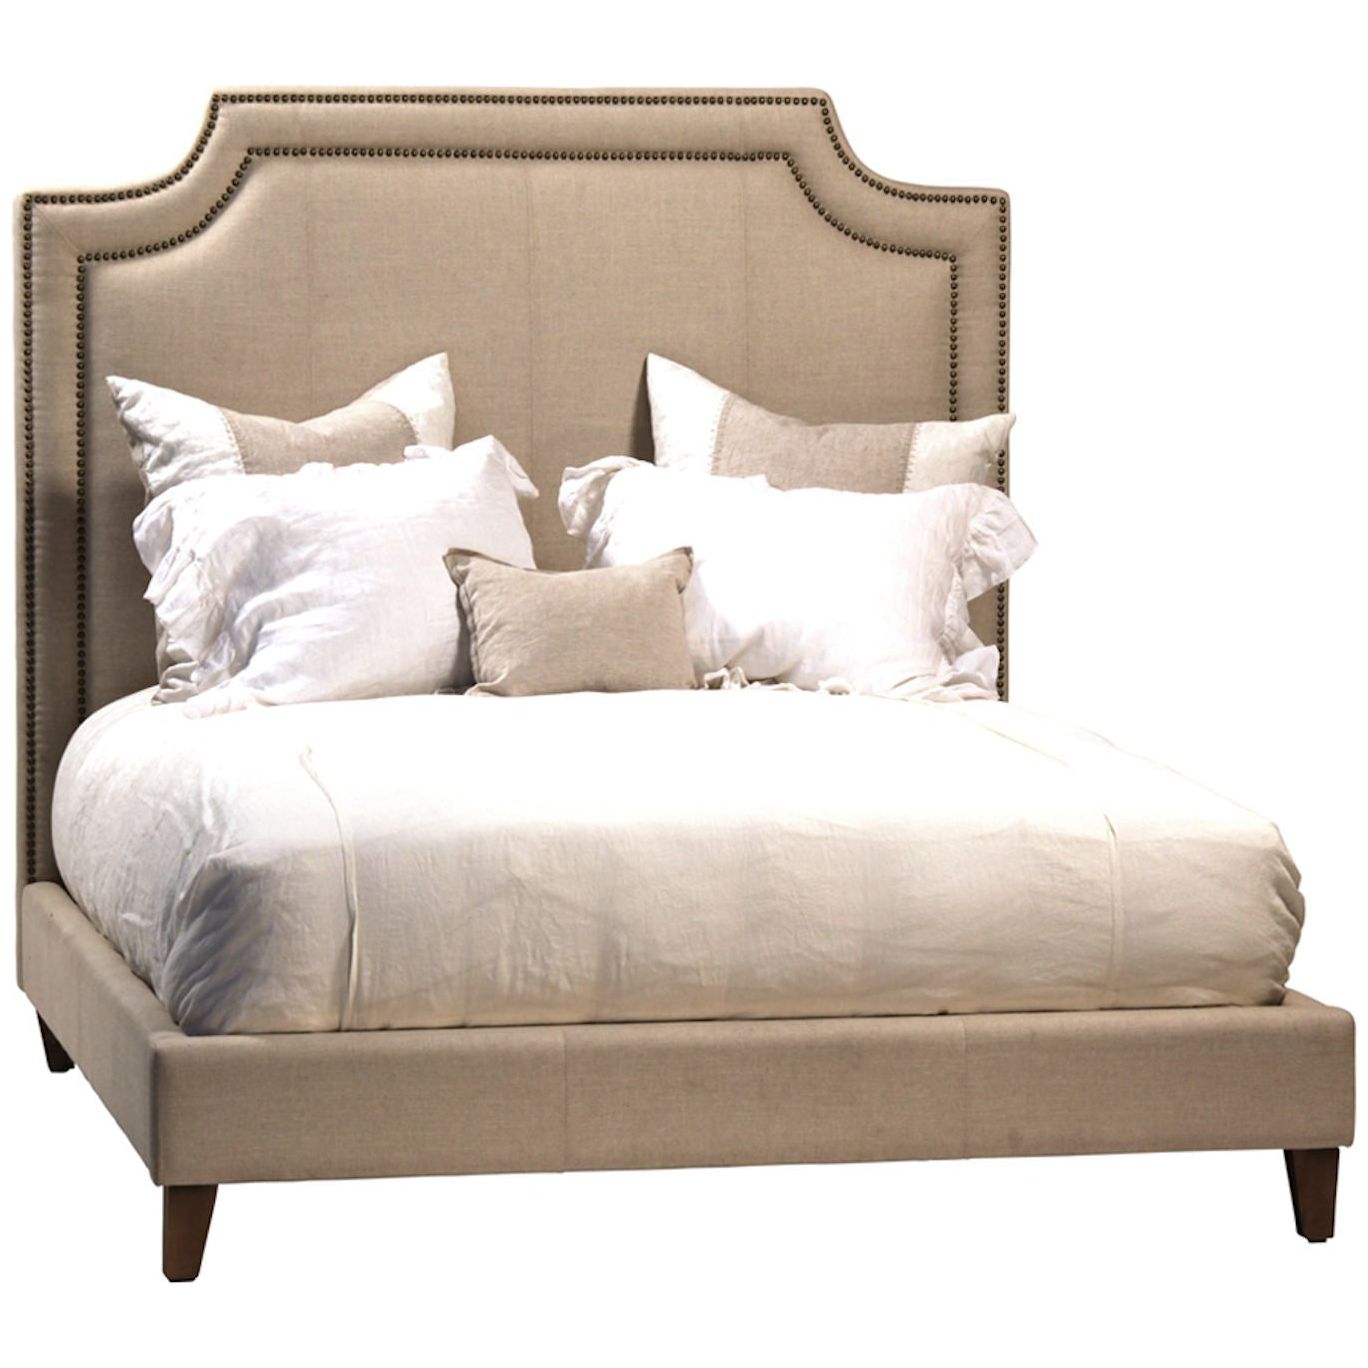 Classic Upholstered Bed With Bronze Nailhead Trim